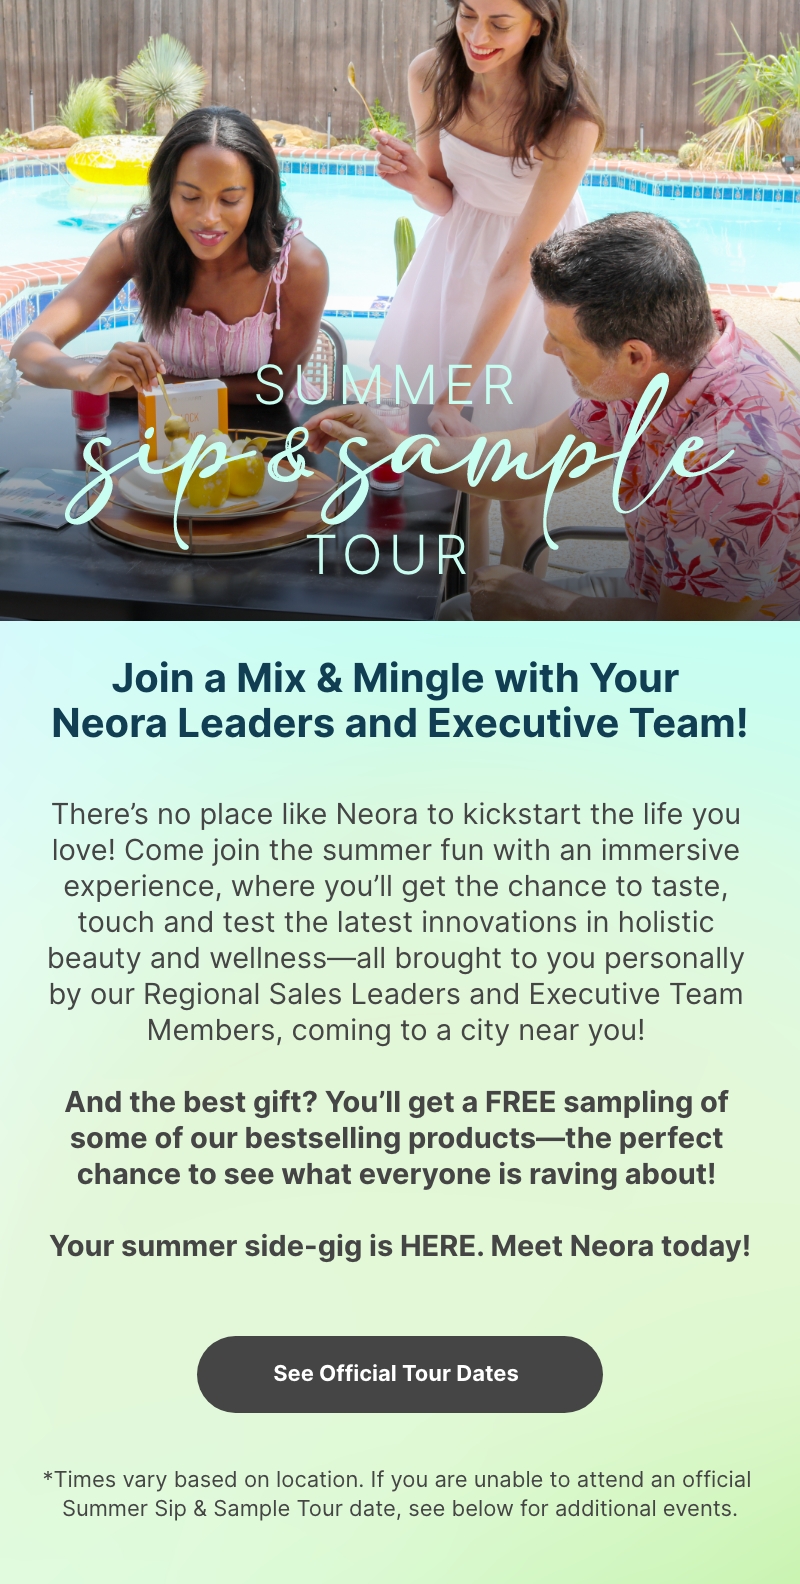 Sip & Sample. Join a Mix & Mangle with your Neora Leaders!